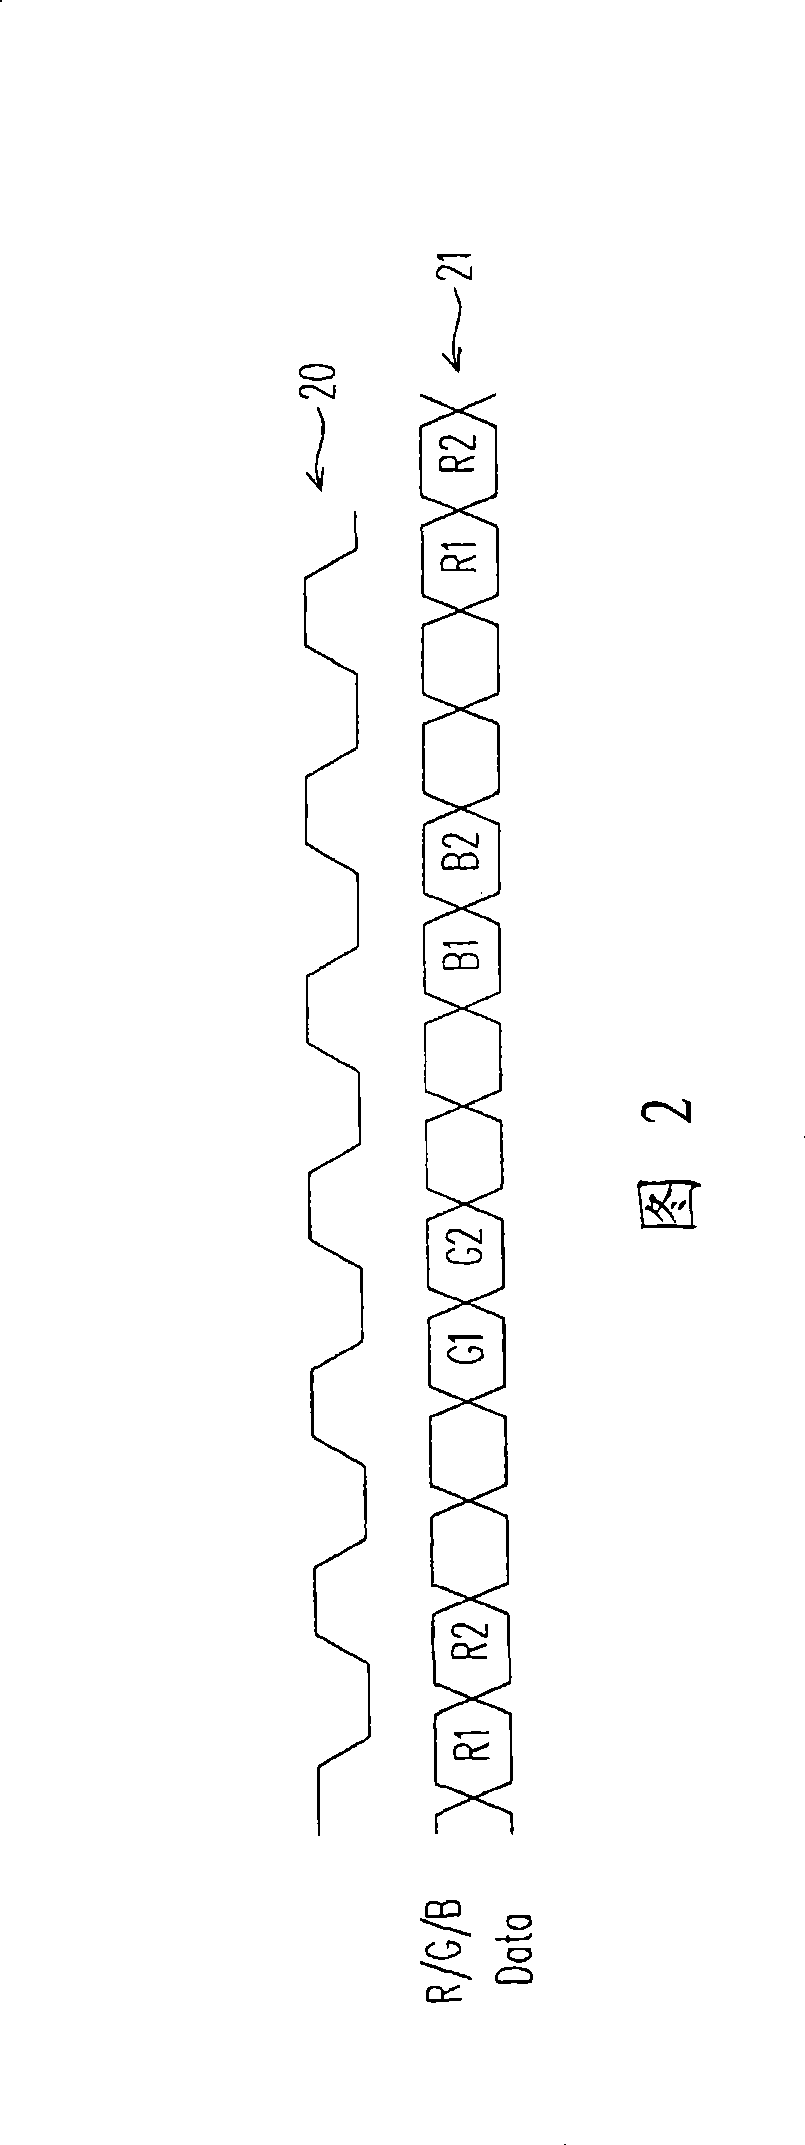 Clock and data codependent high transmission rate interface